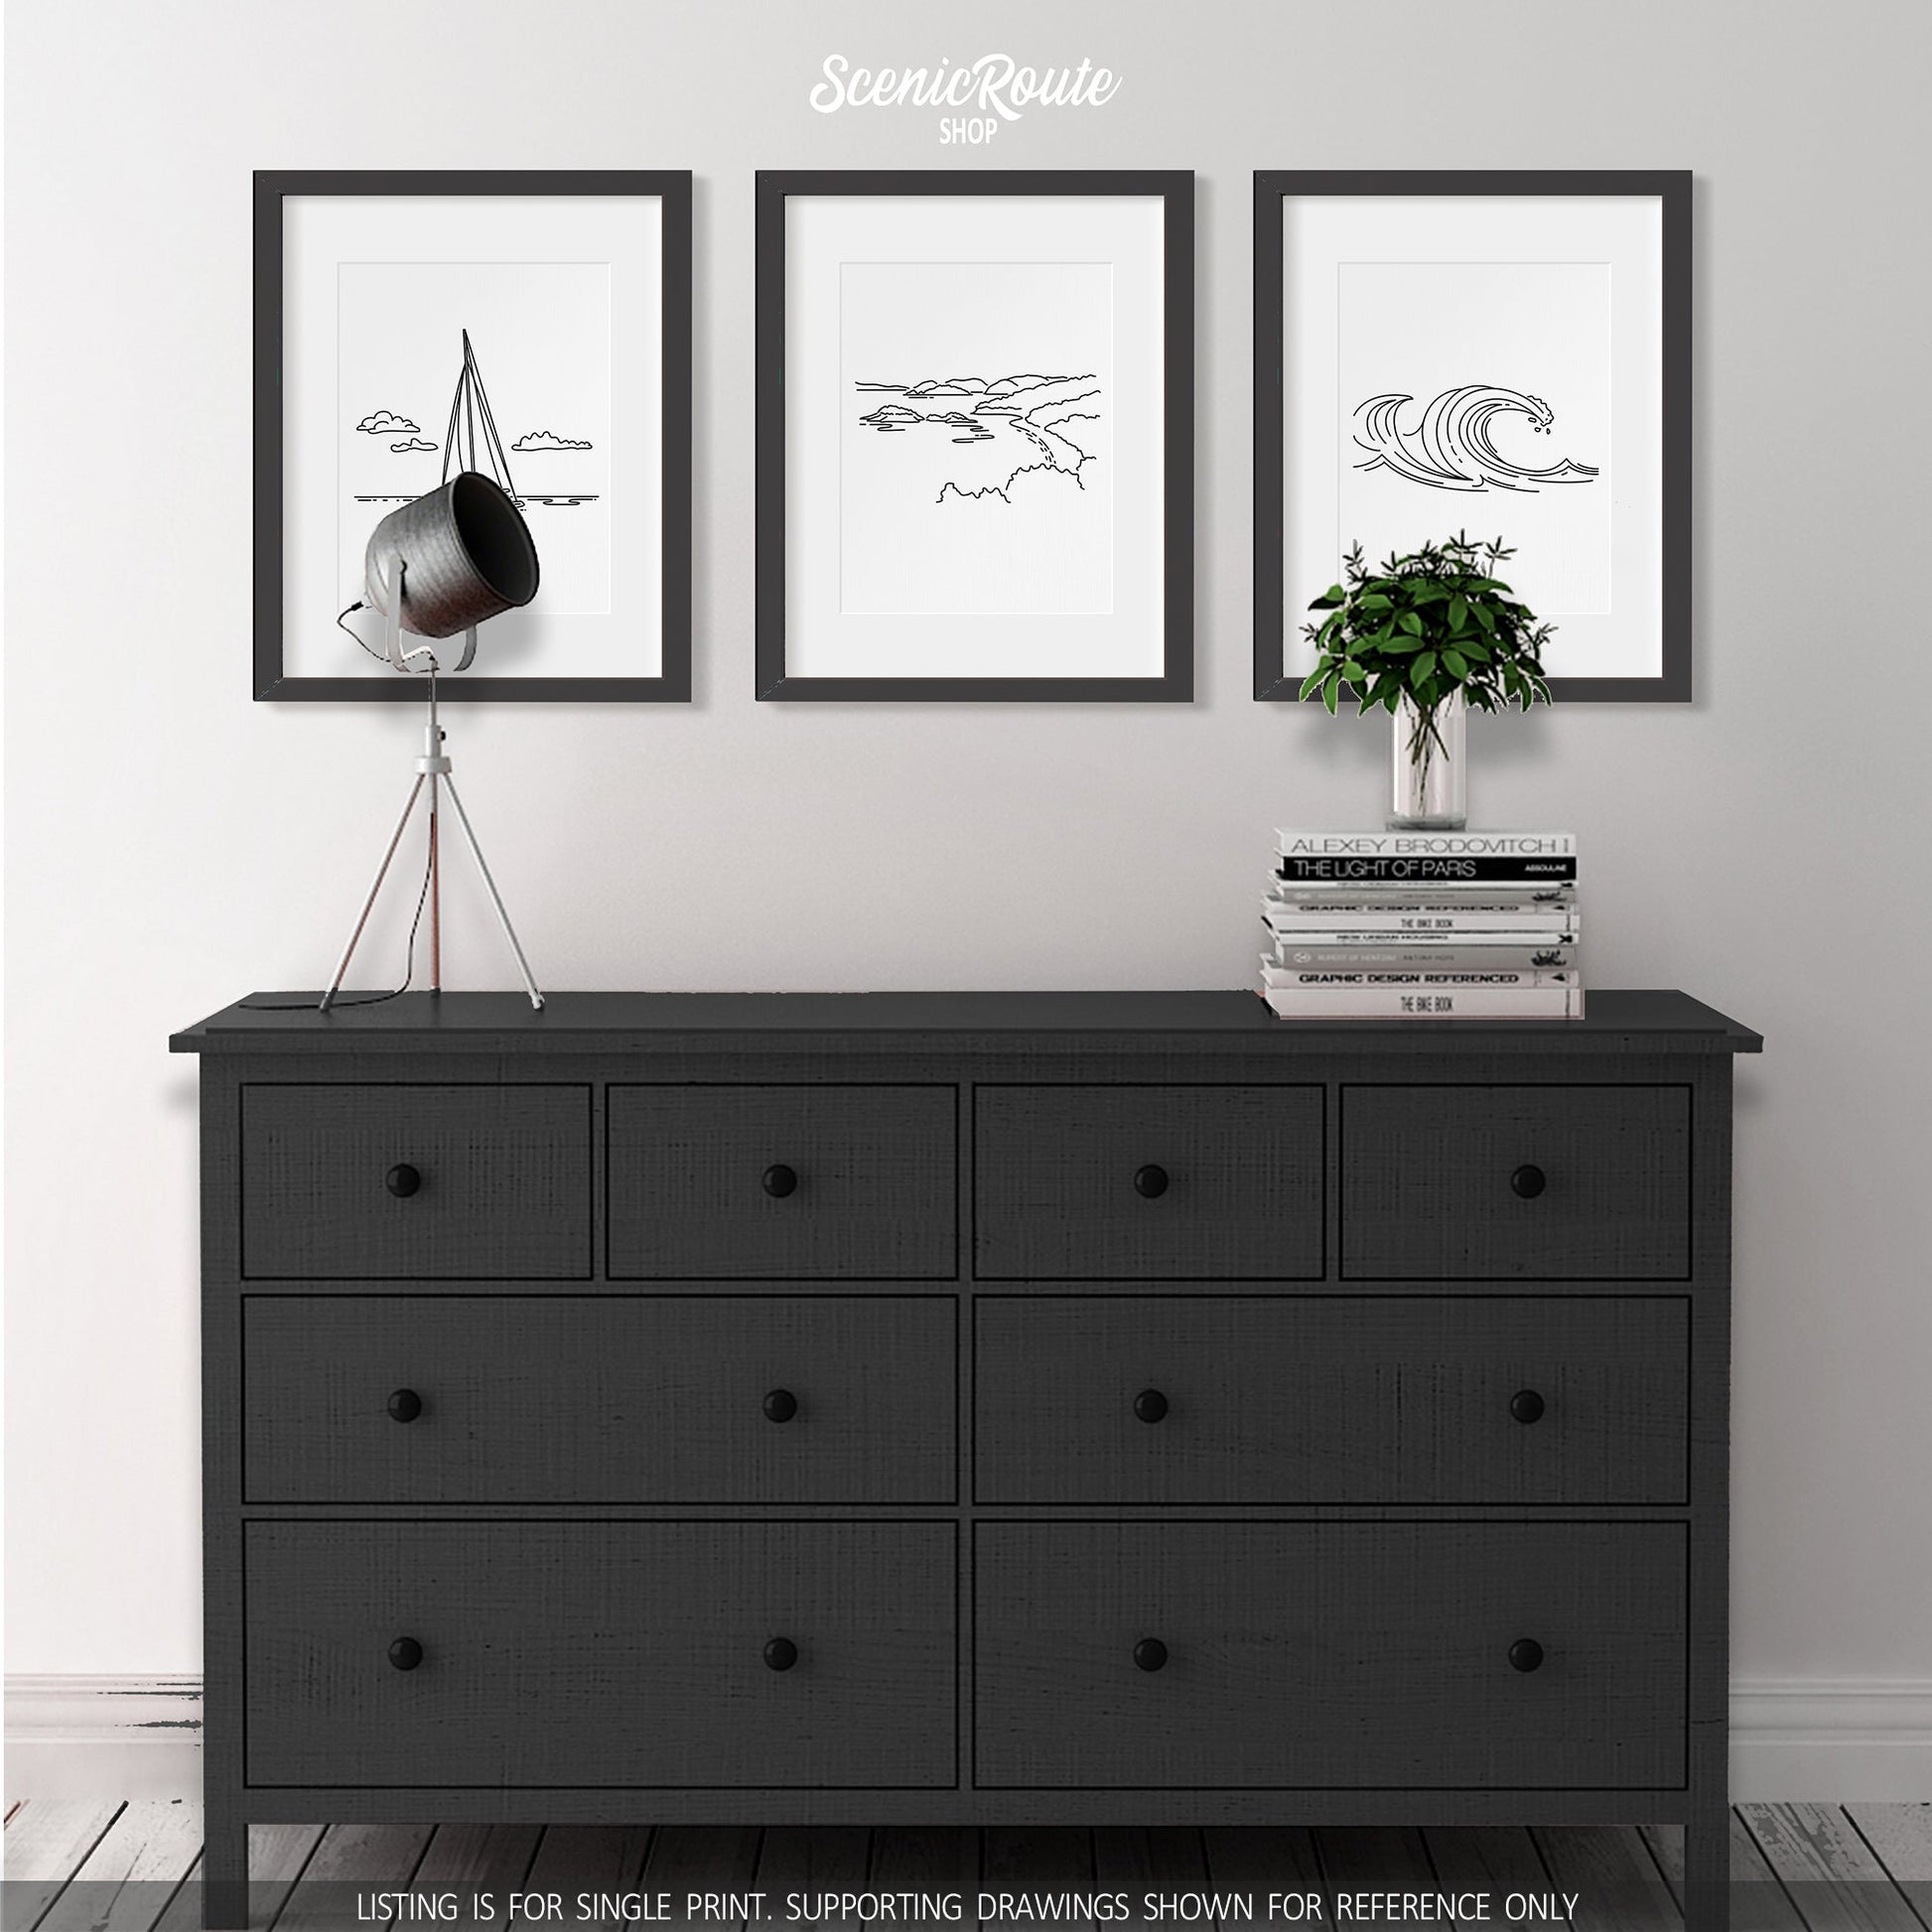 A group of three framed drawings on a wall above a dresser with books and a plant. The line art drawings include Sailing, Virgin Islands National Park, and Waves